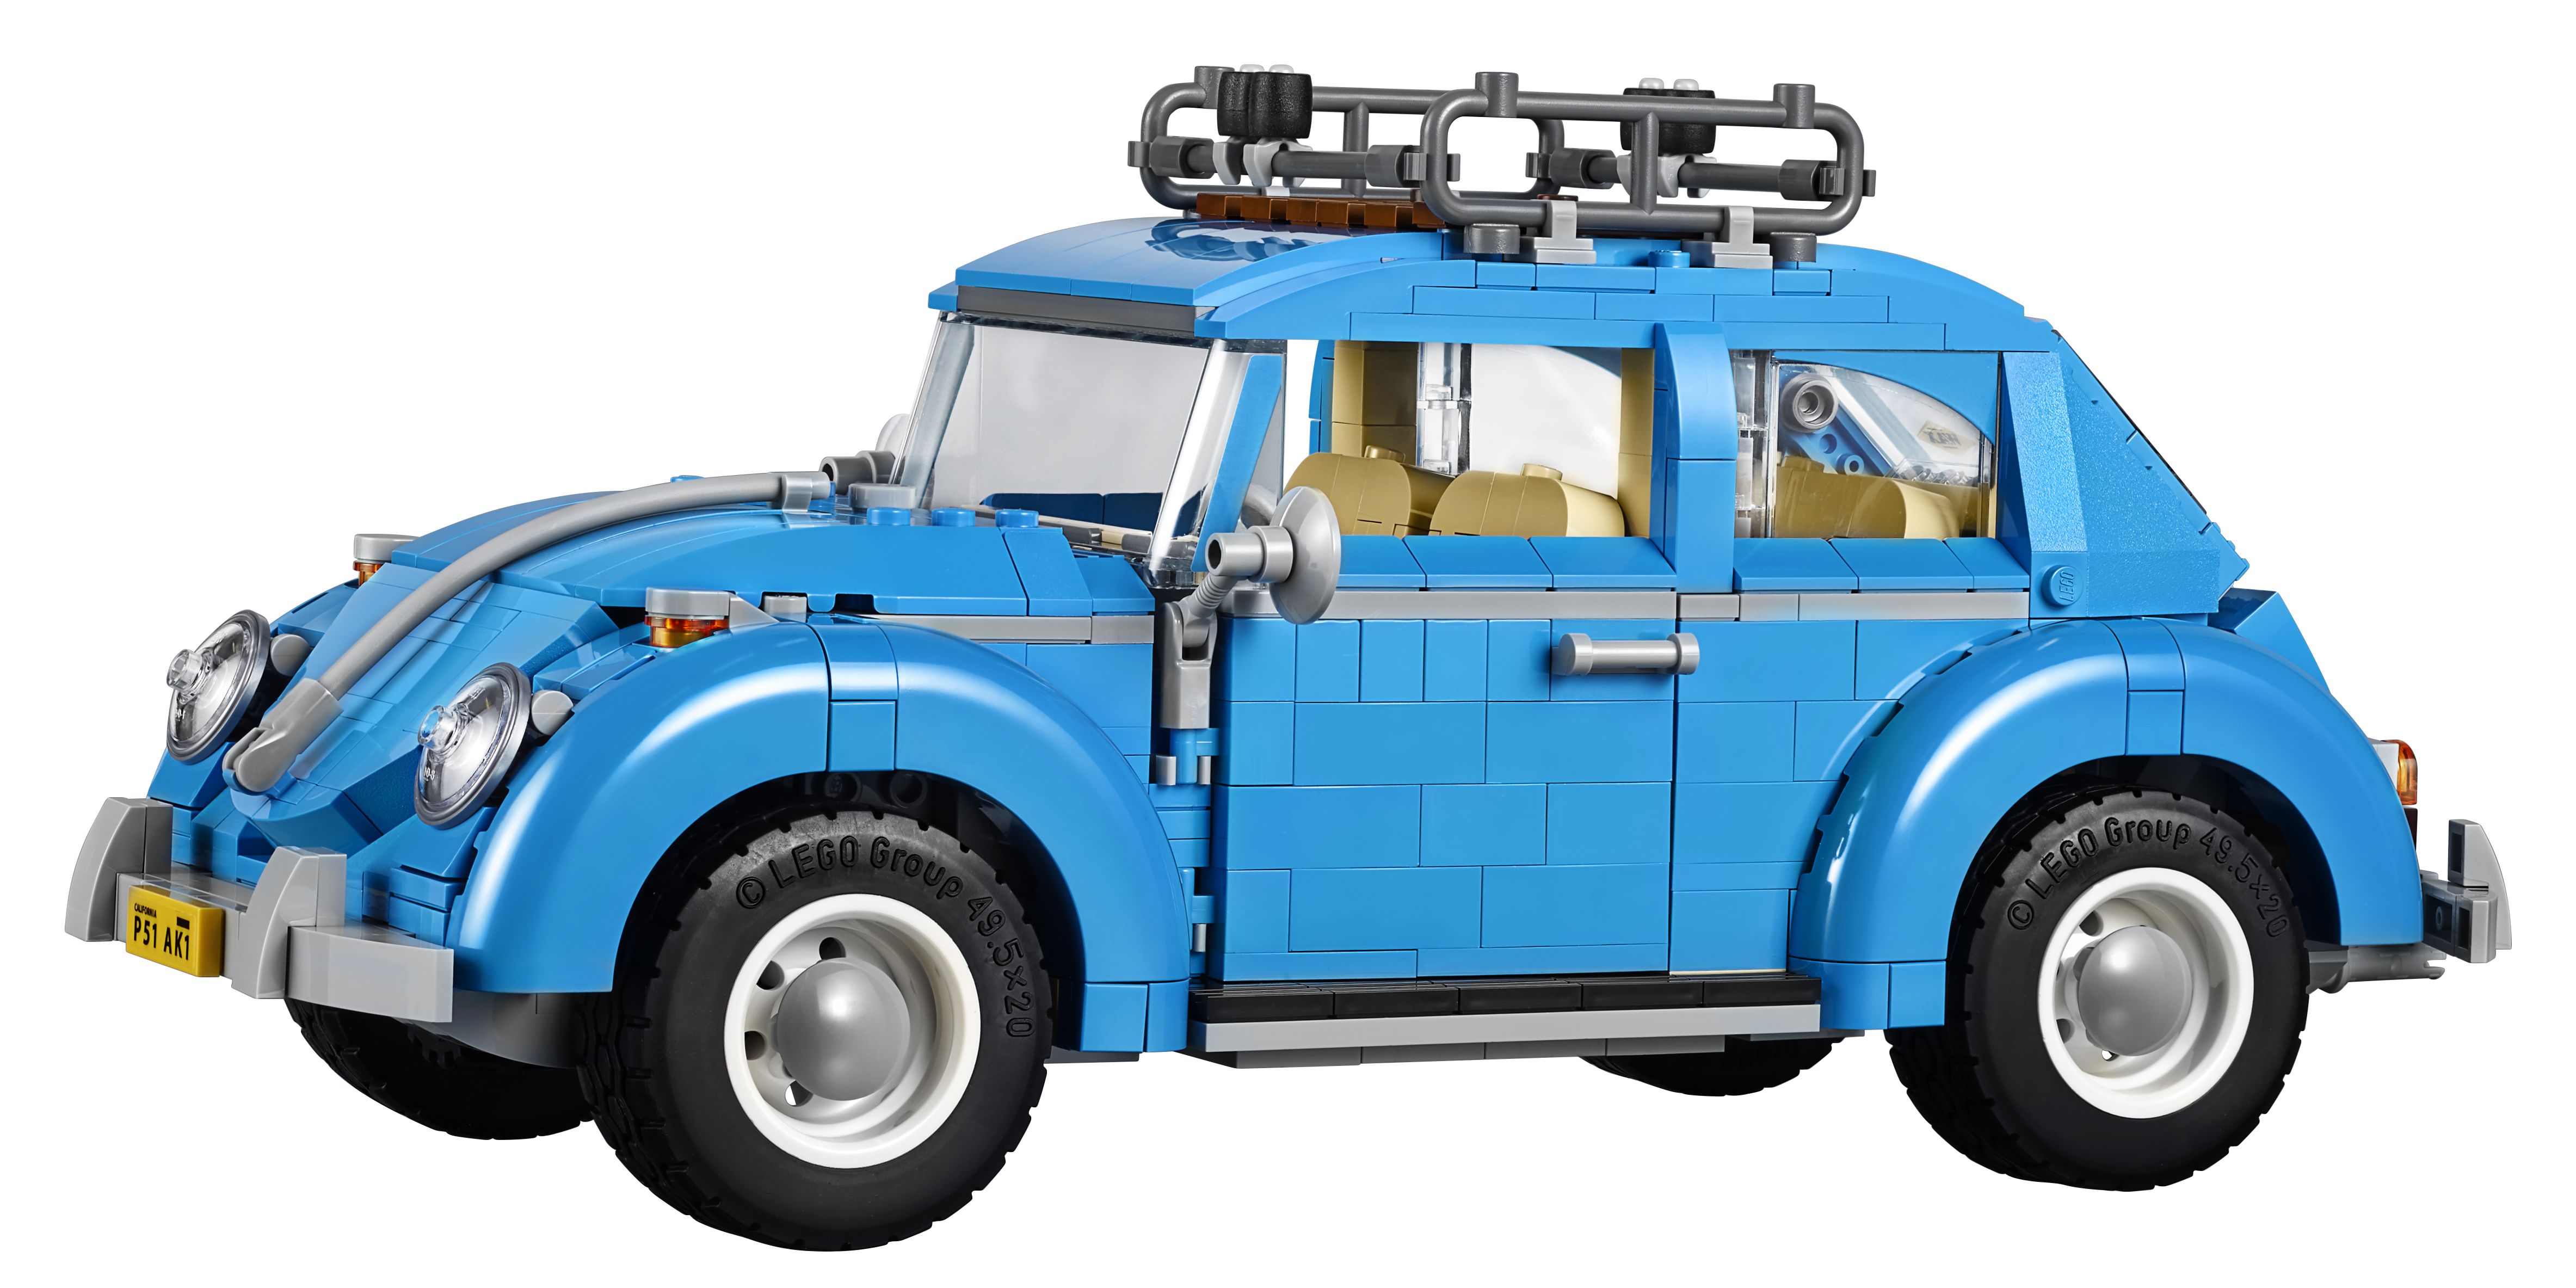 amplifikation masse Massage This New Volkswagen Beetle Lego Set Is Pretty Much Perfect